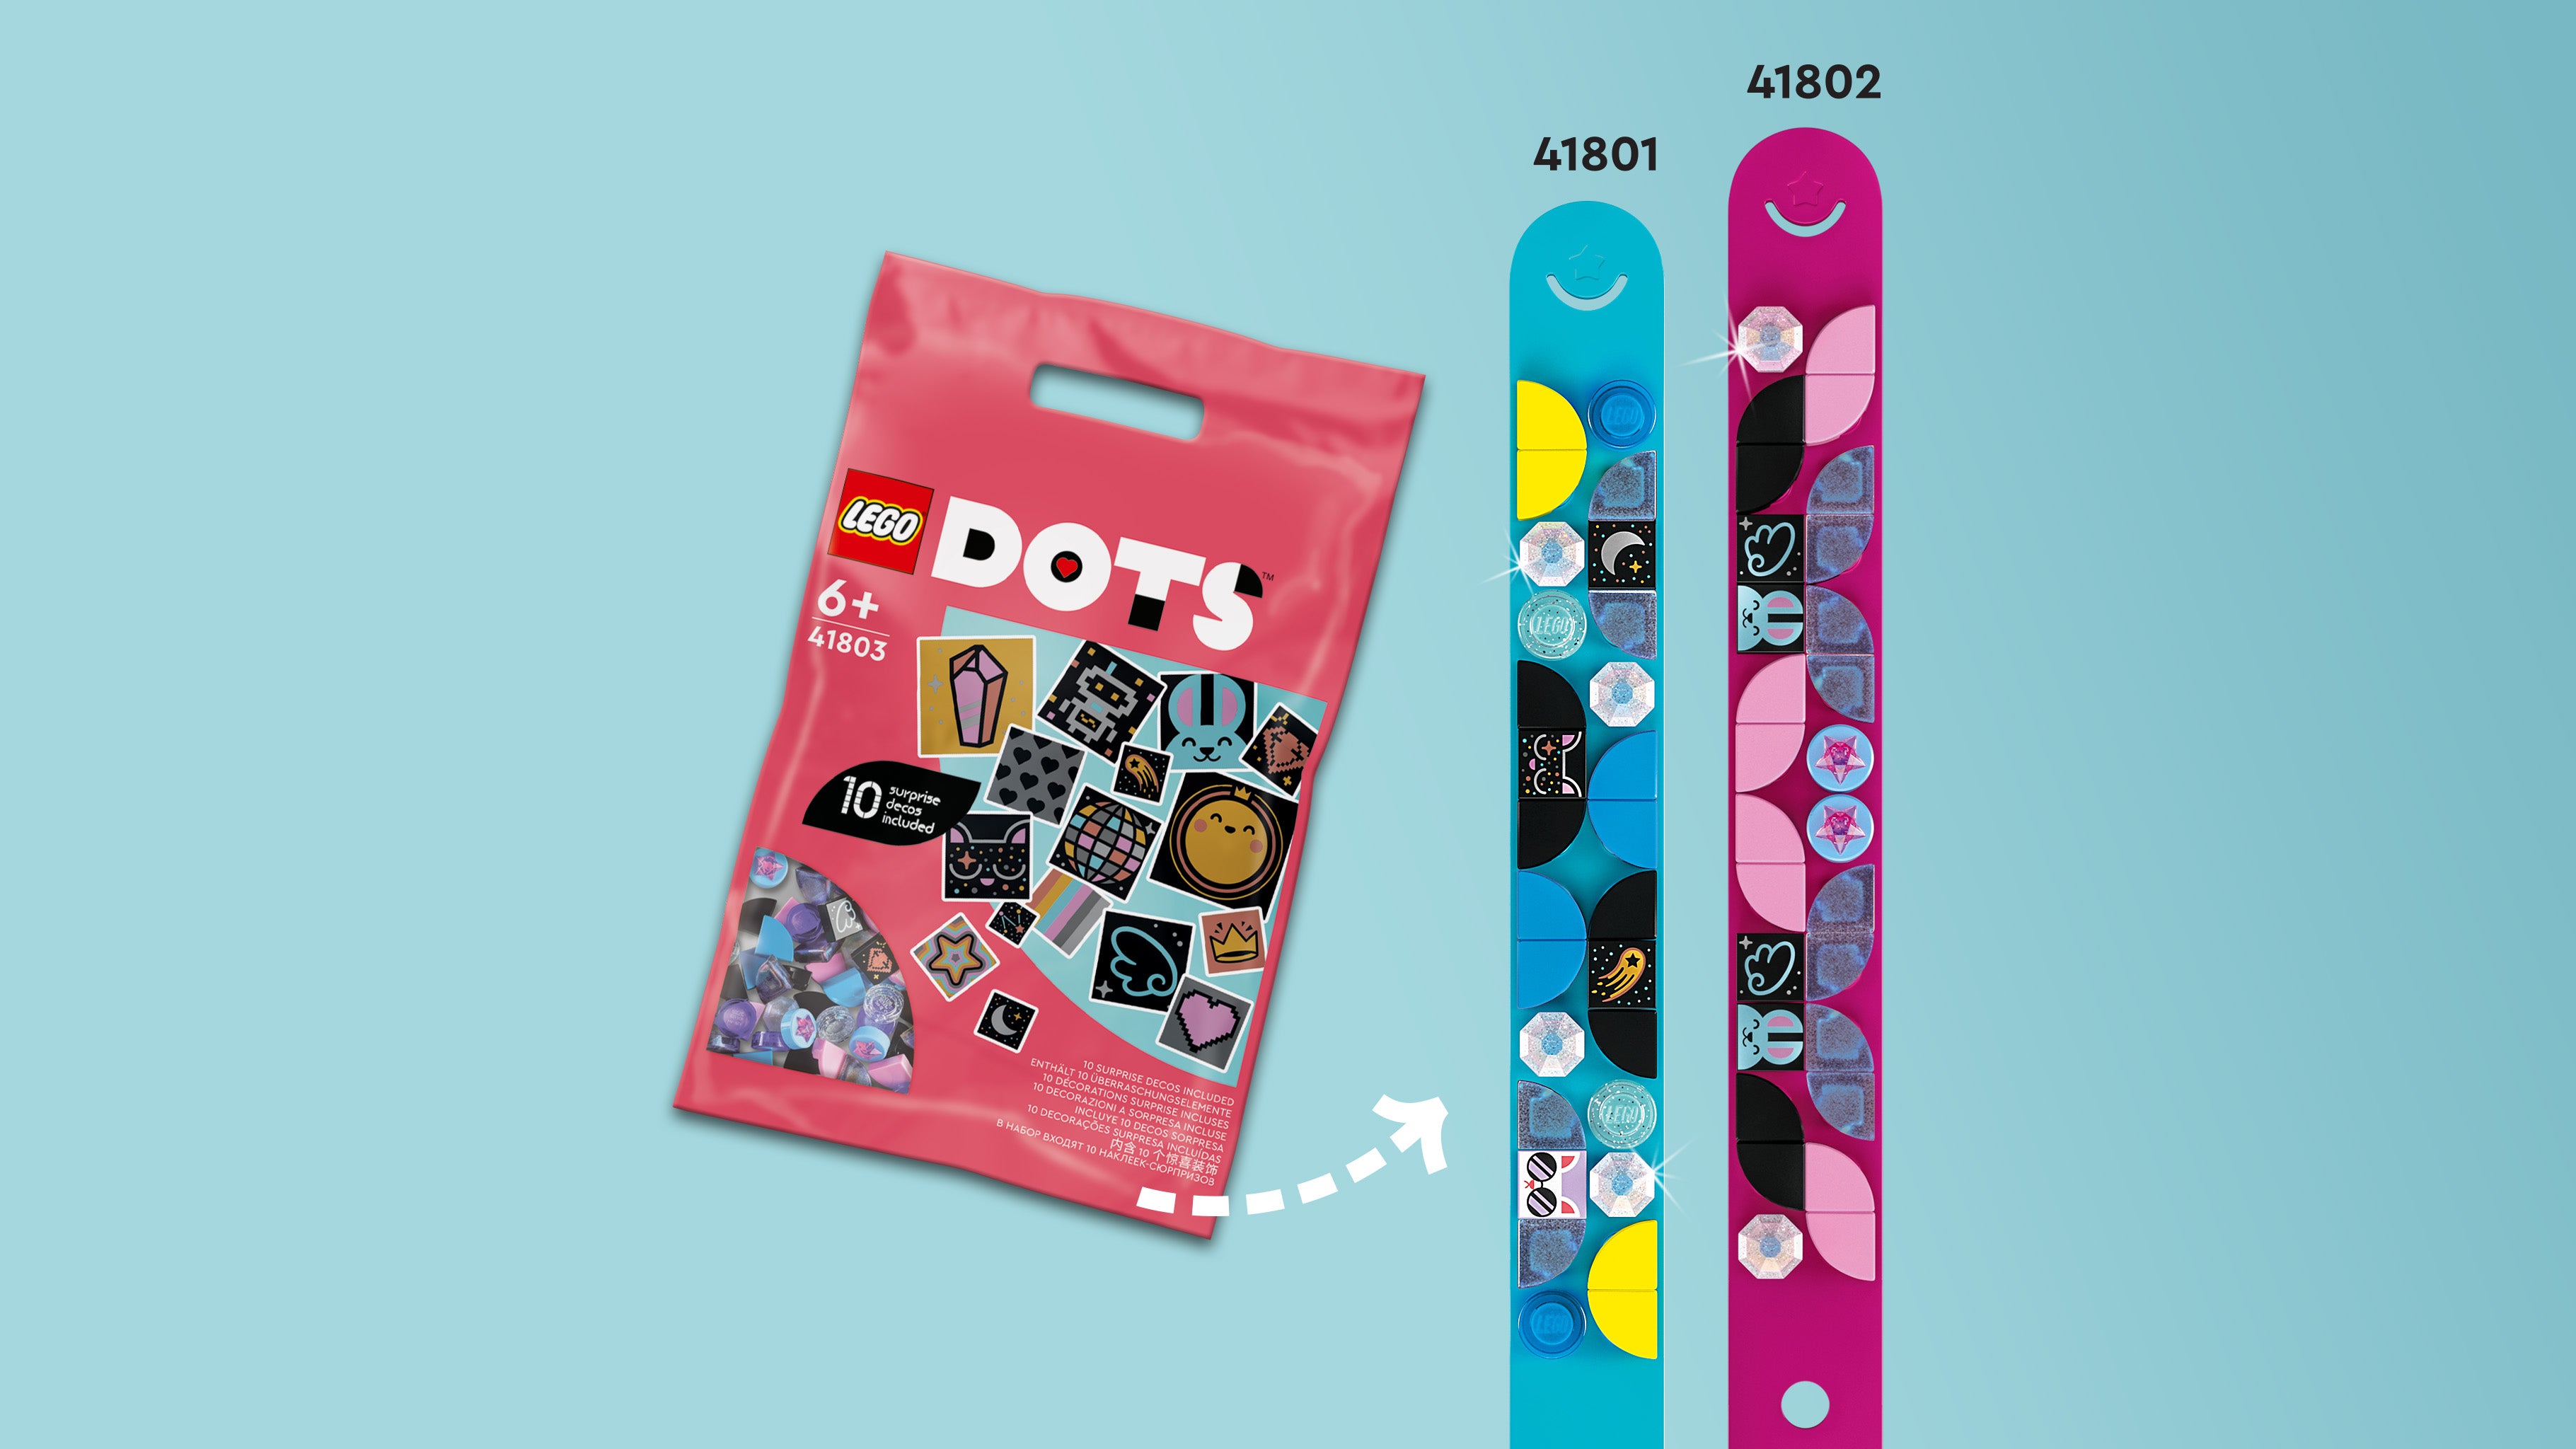 Lego 41803 Extra DOTS Series 8 - Glam